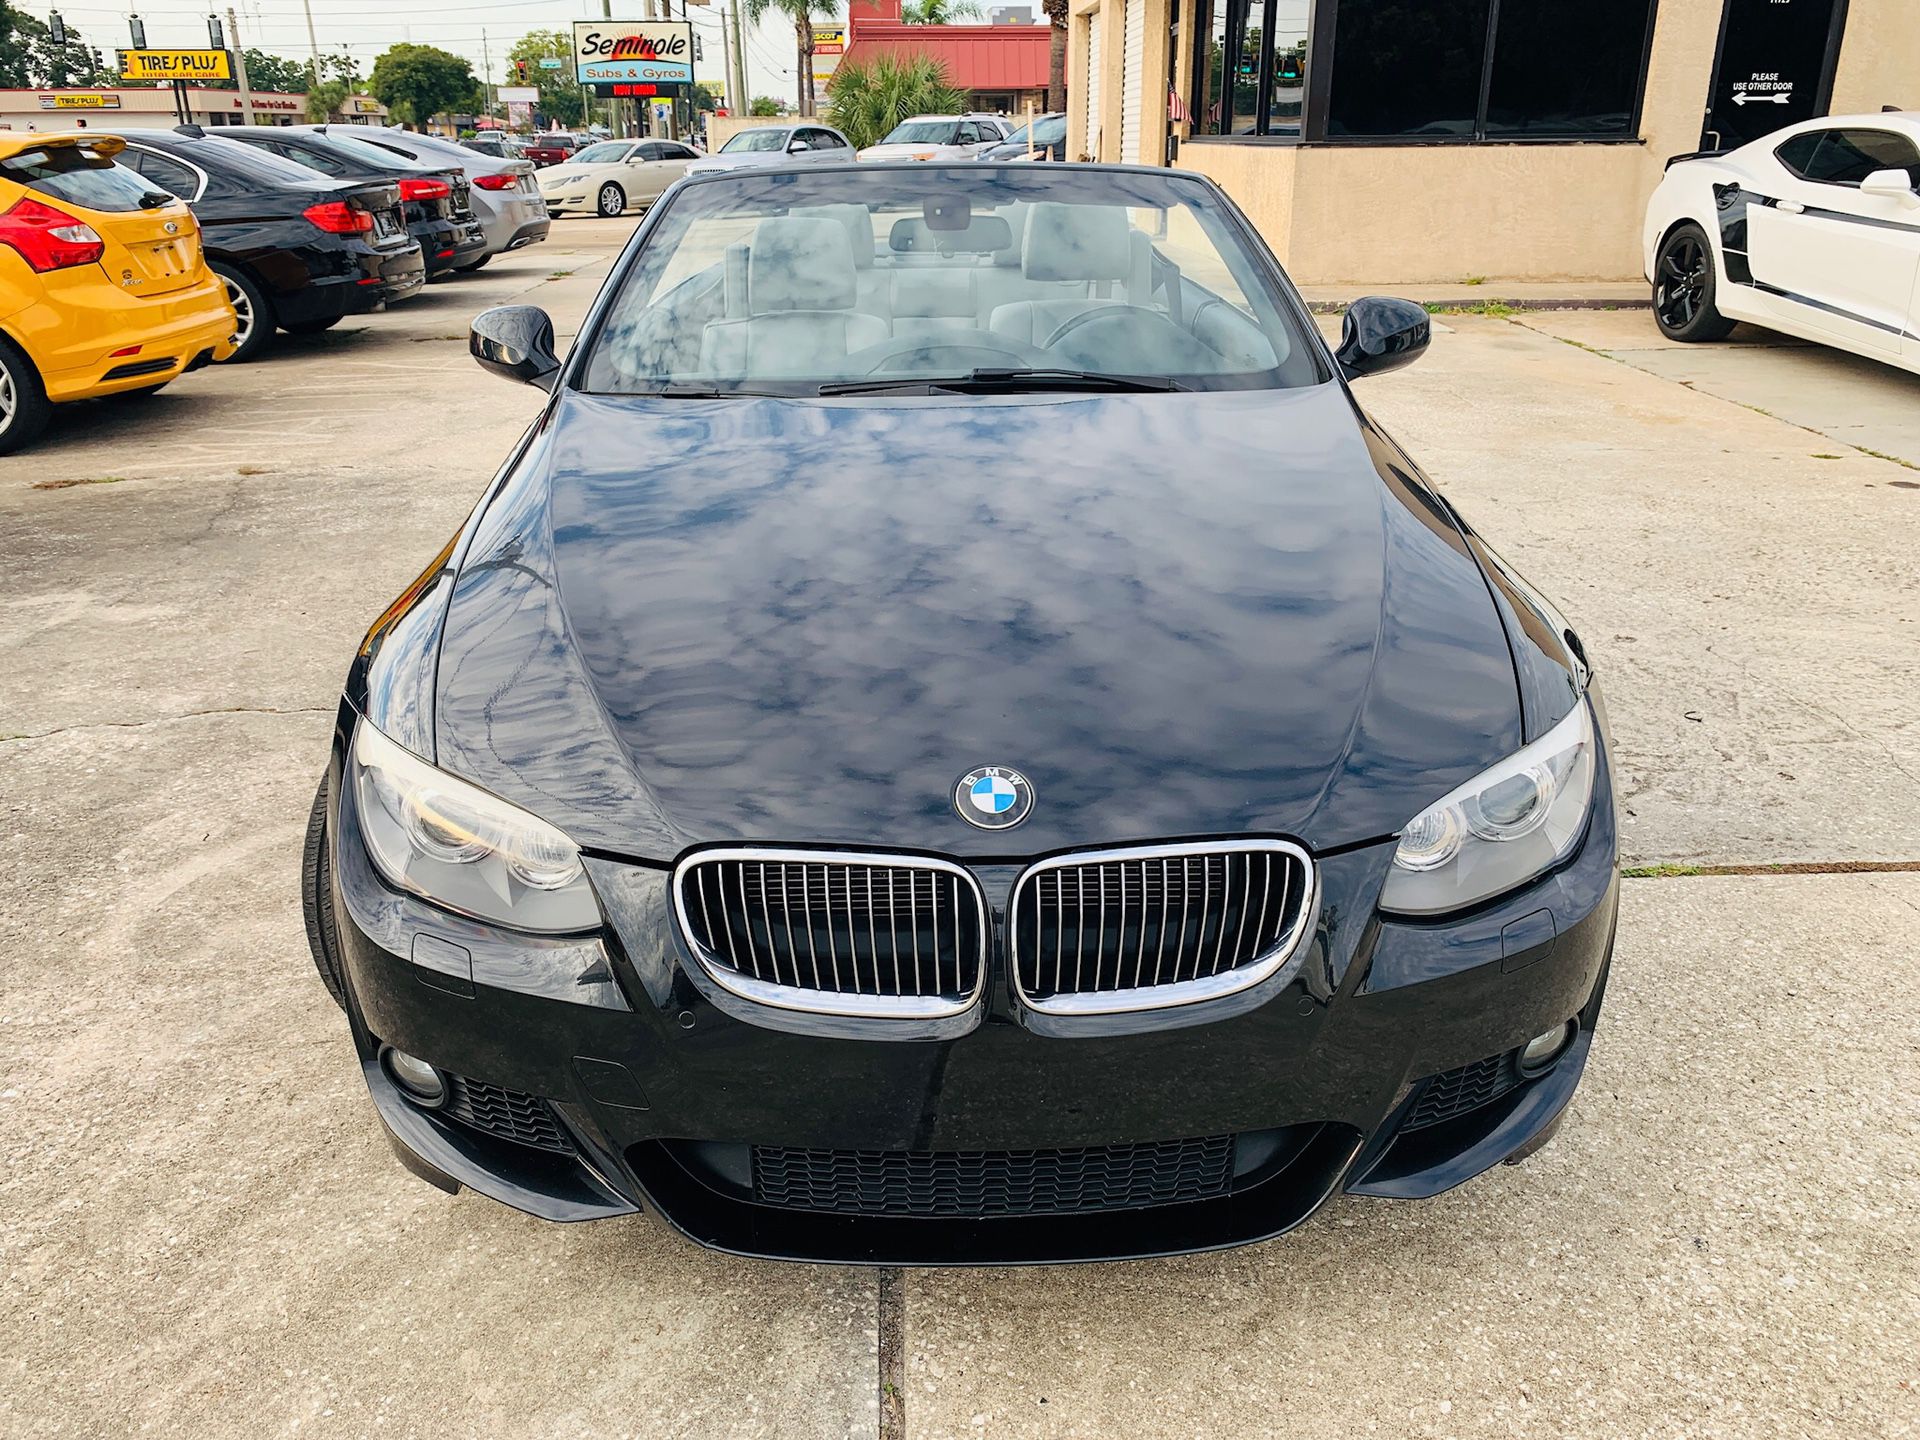 2013 BMW 335i convertible 80k trade ins welcome open 7 days!